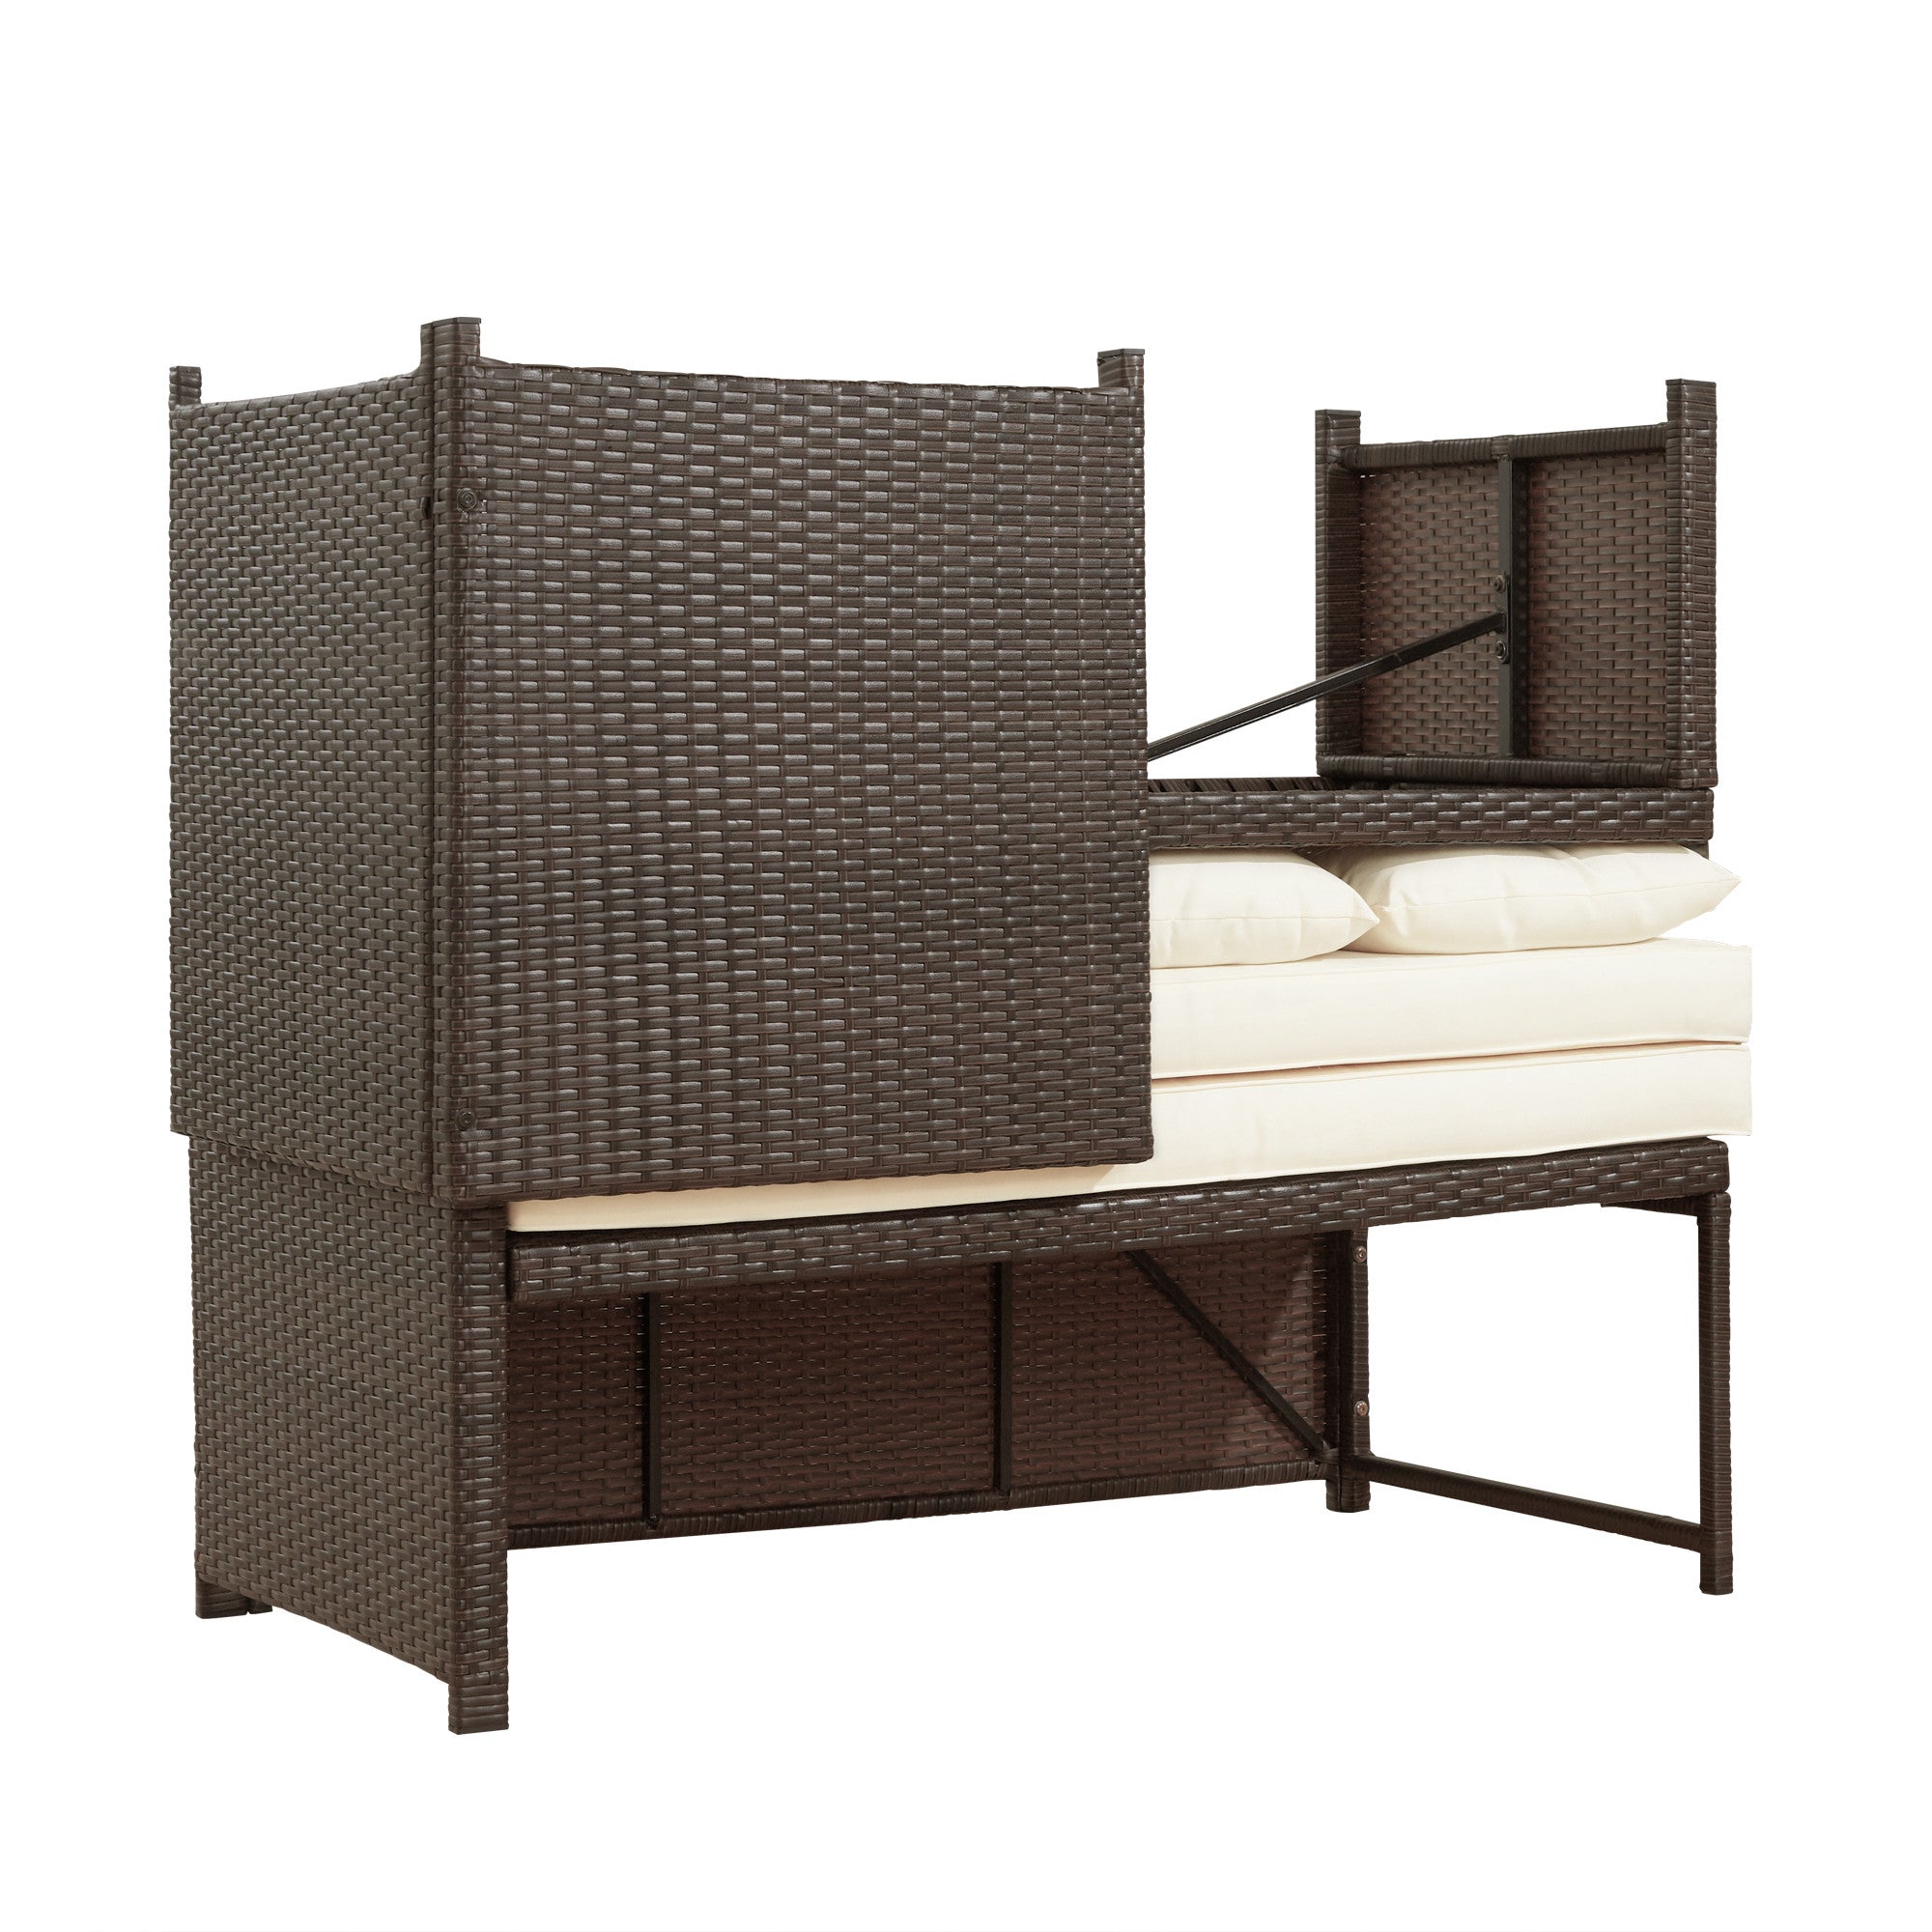 Teamson Home Outdoor 3-Piece Rattan Patio Sectional Set with Cushions, Brown/White